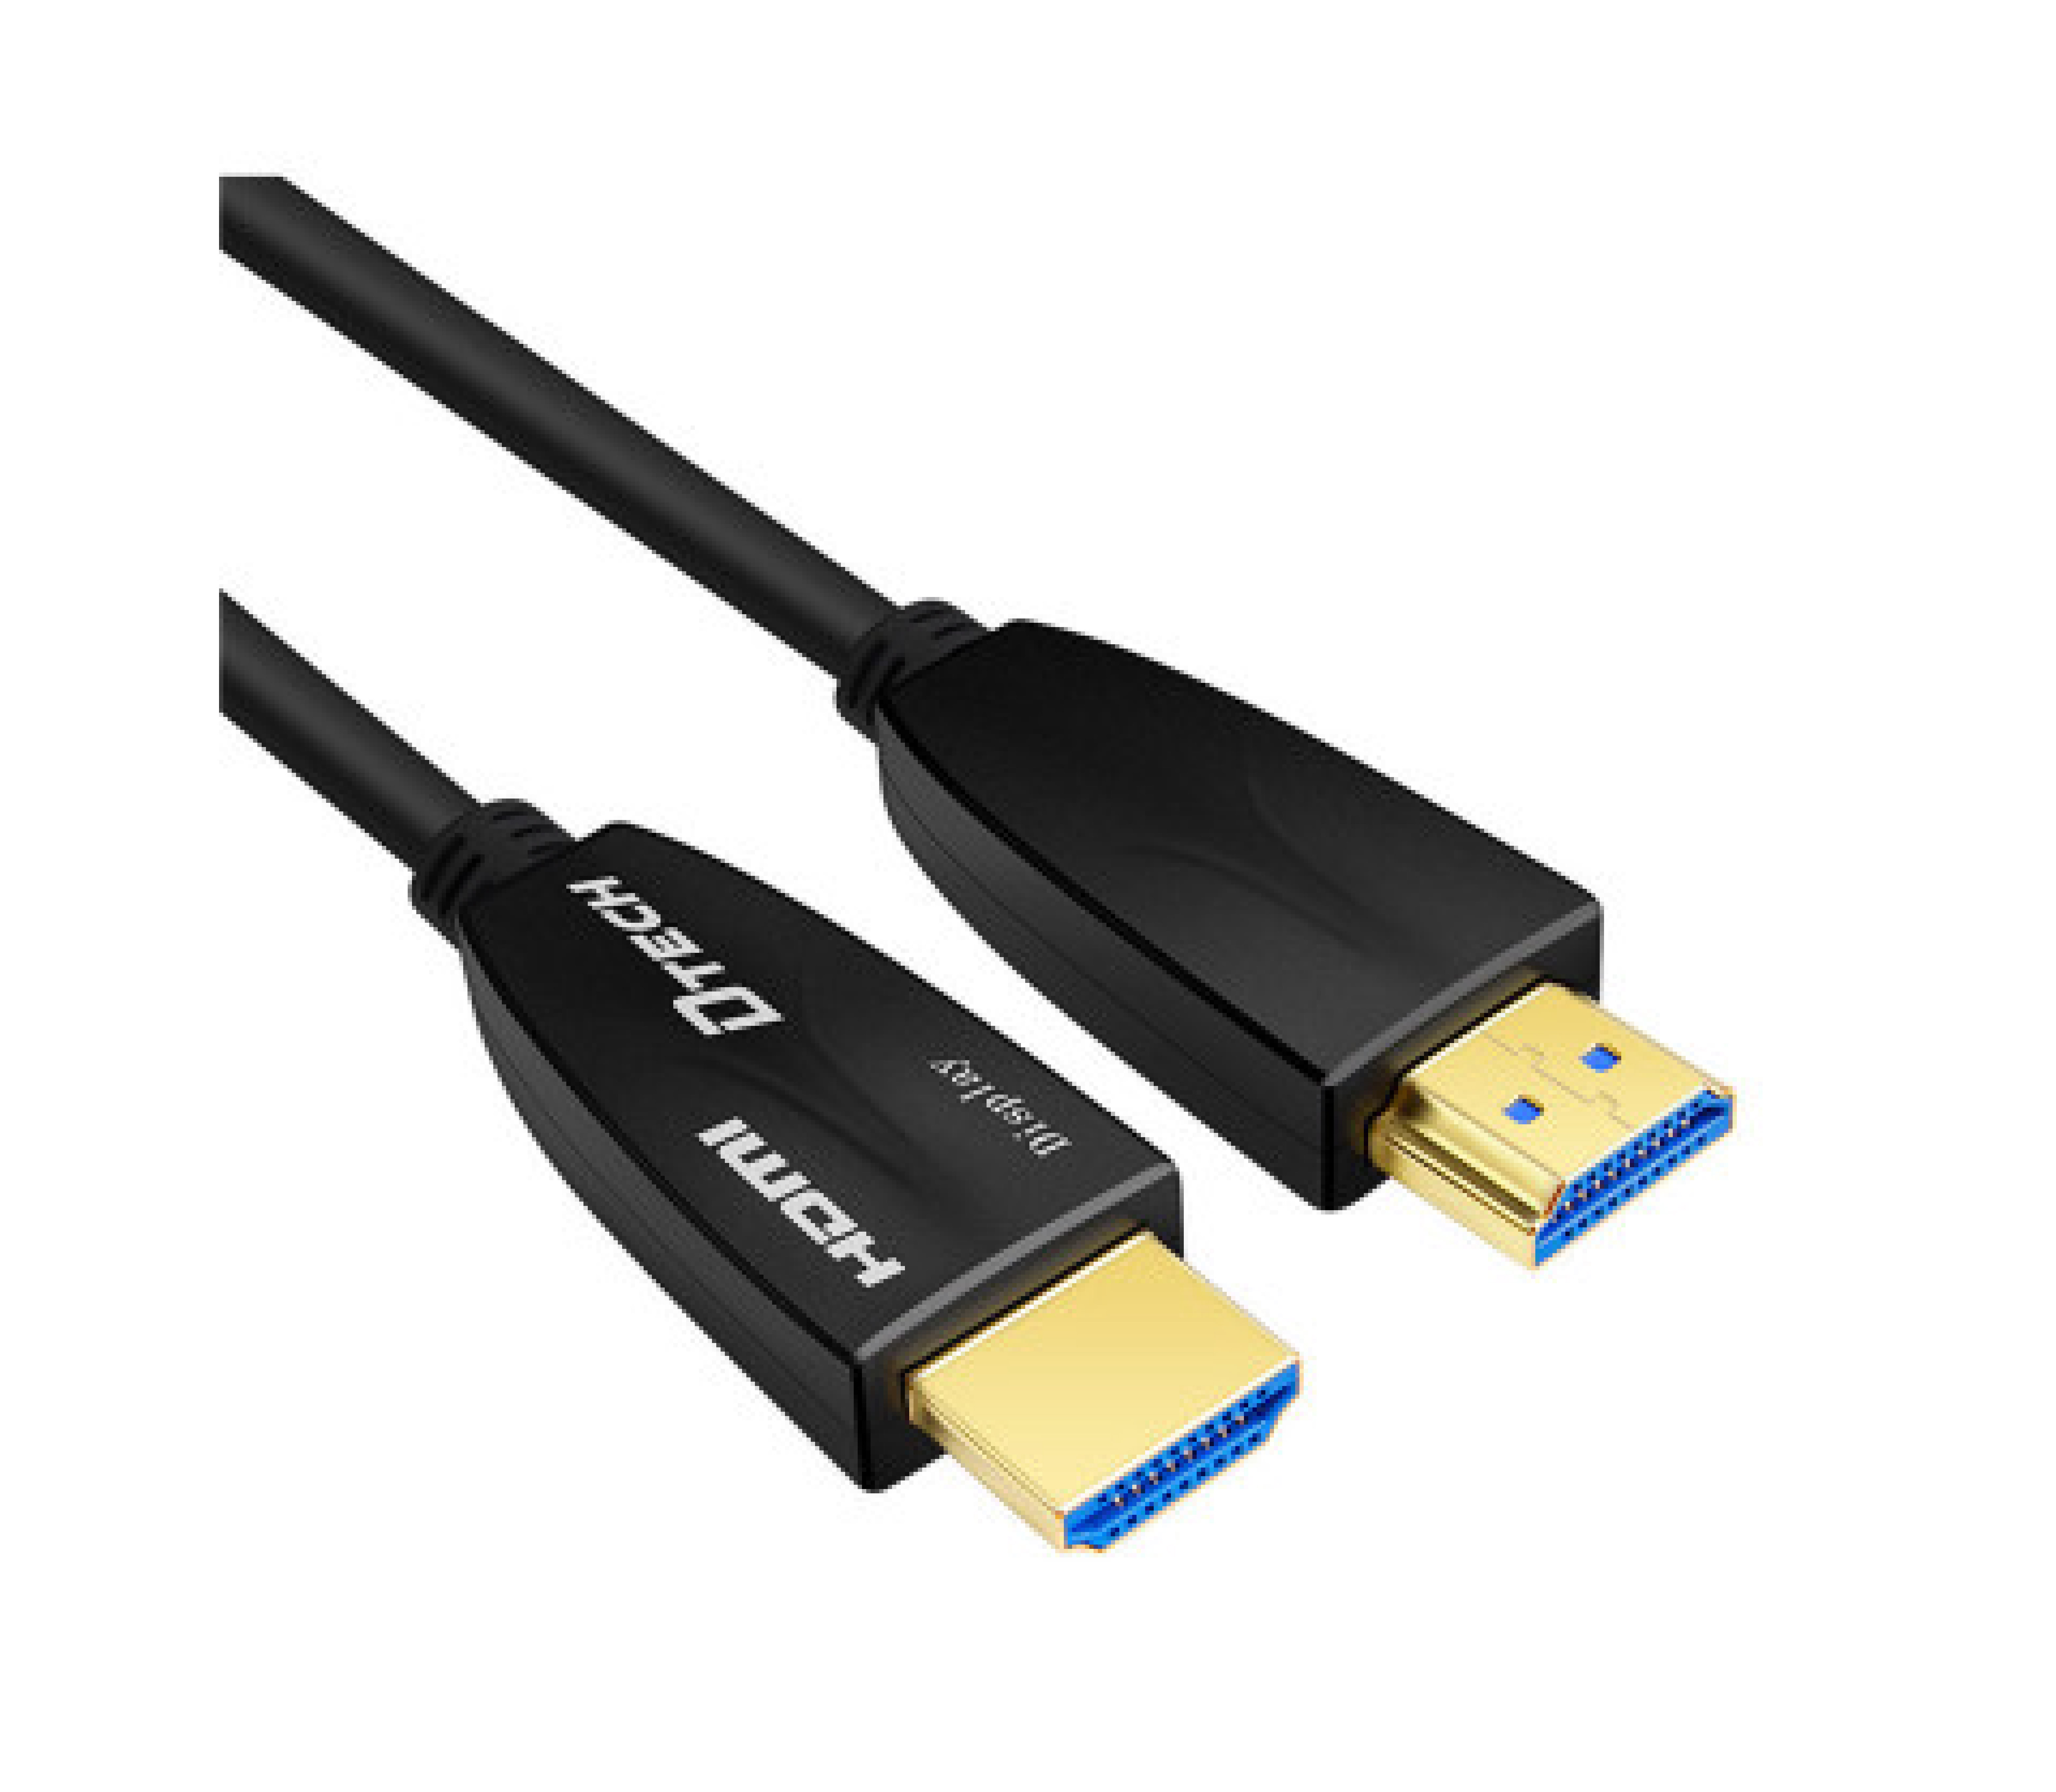 DTECH DT-HF2025 Cable HDMI